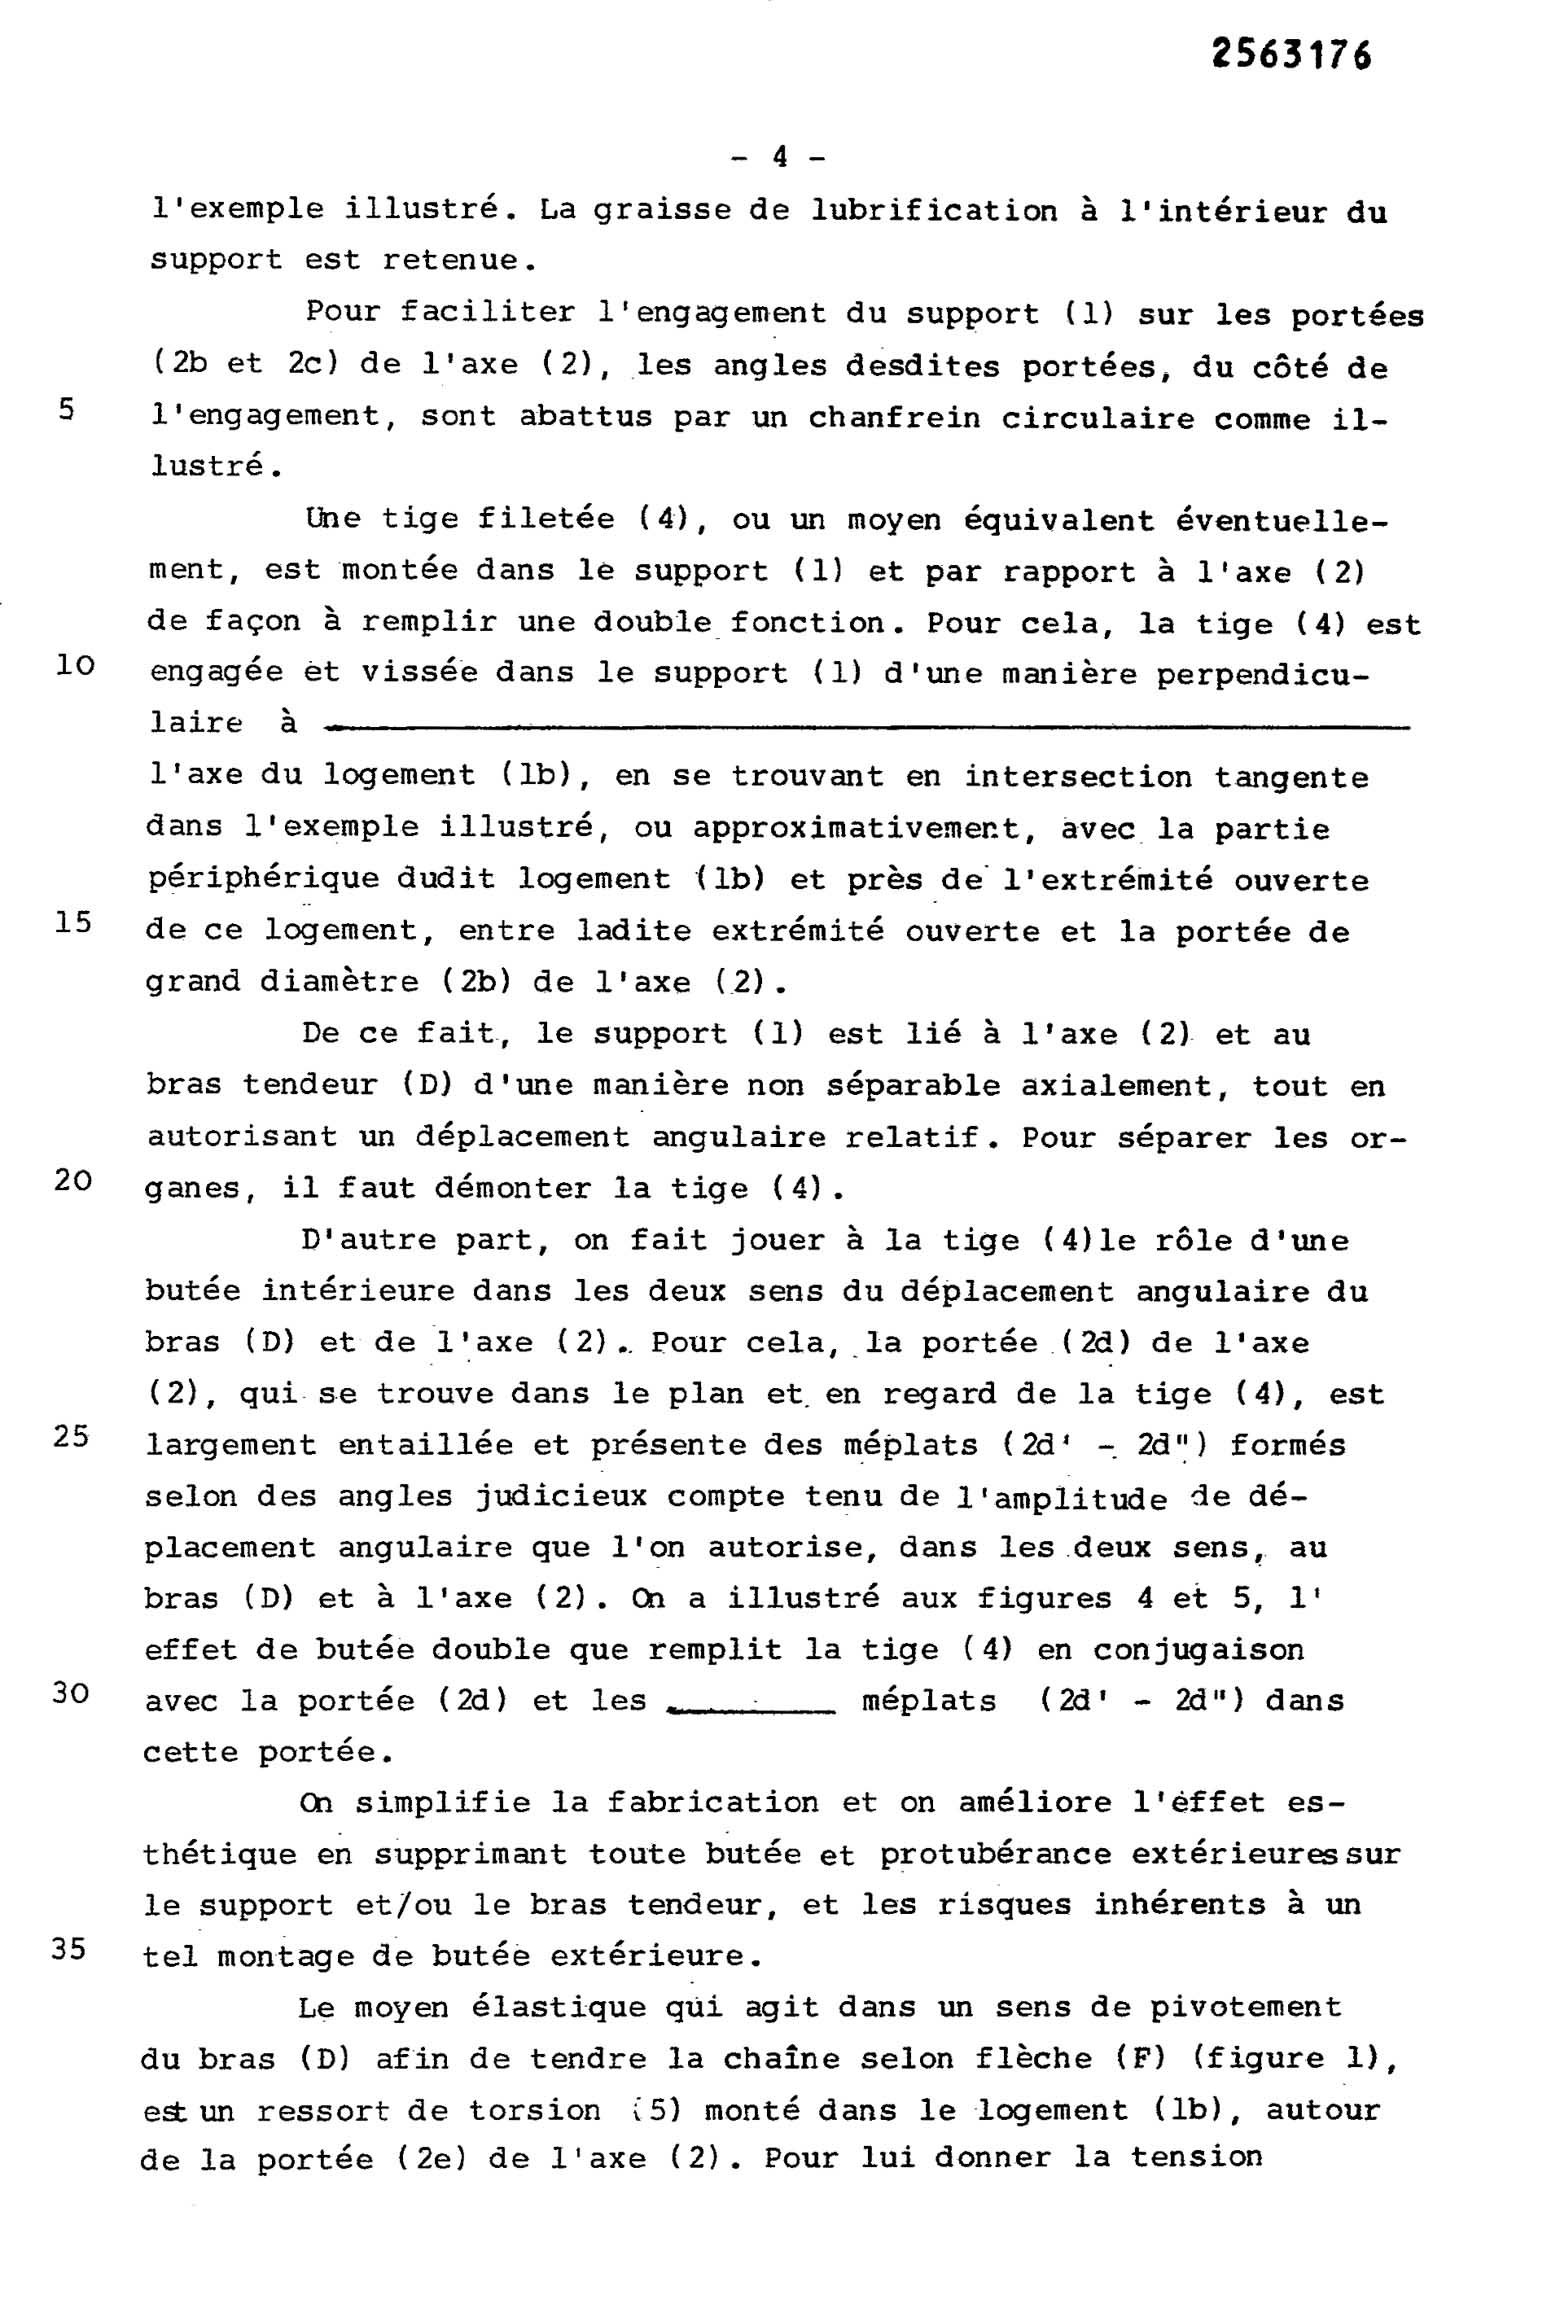 French Patent 2,563,176 - Simplex scan 005 main image